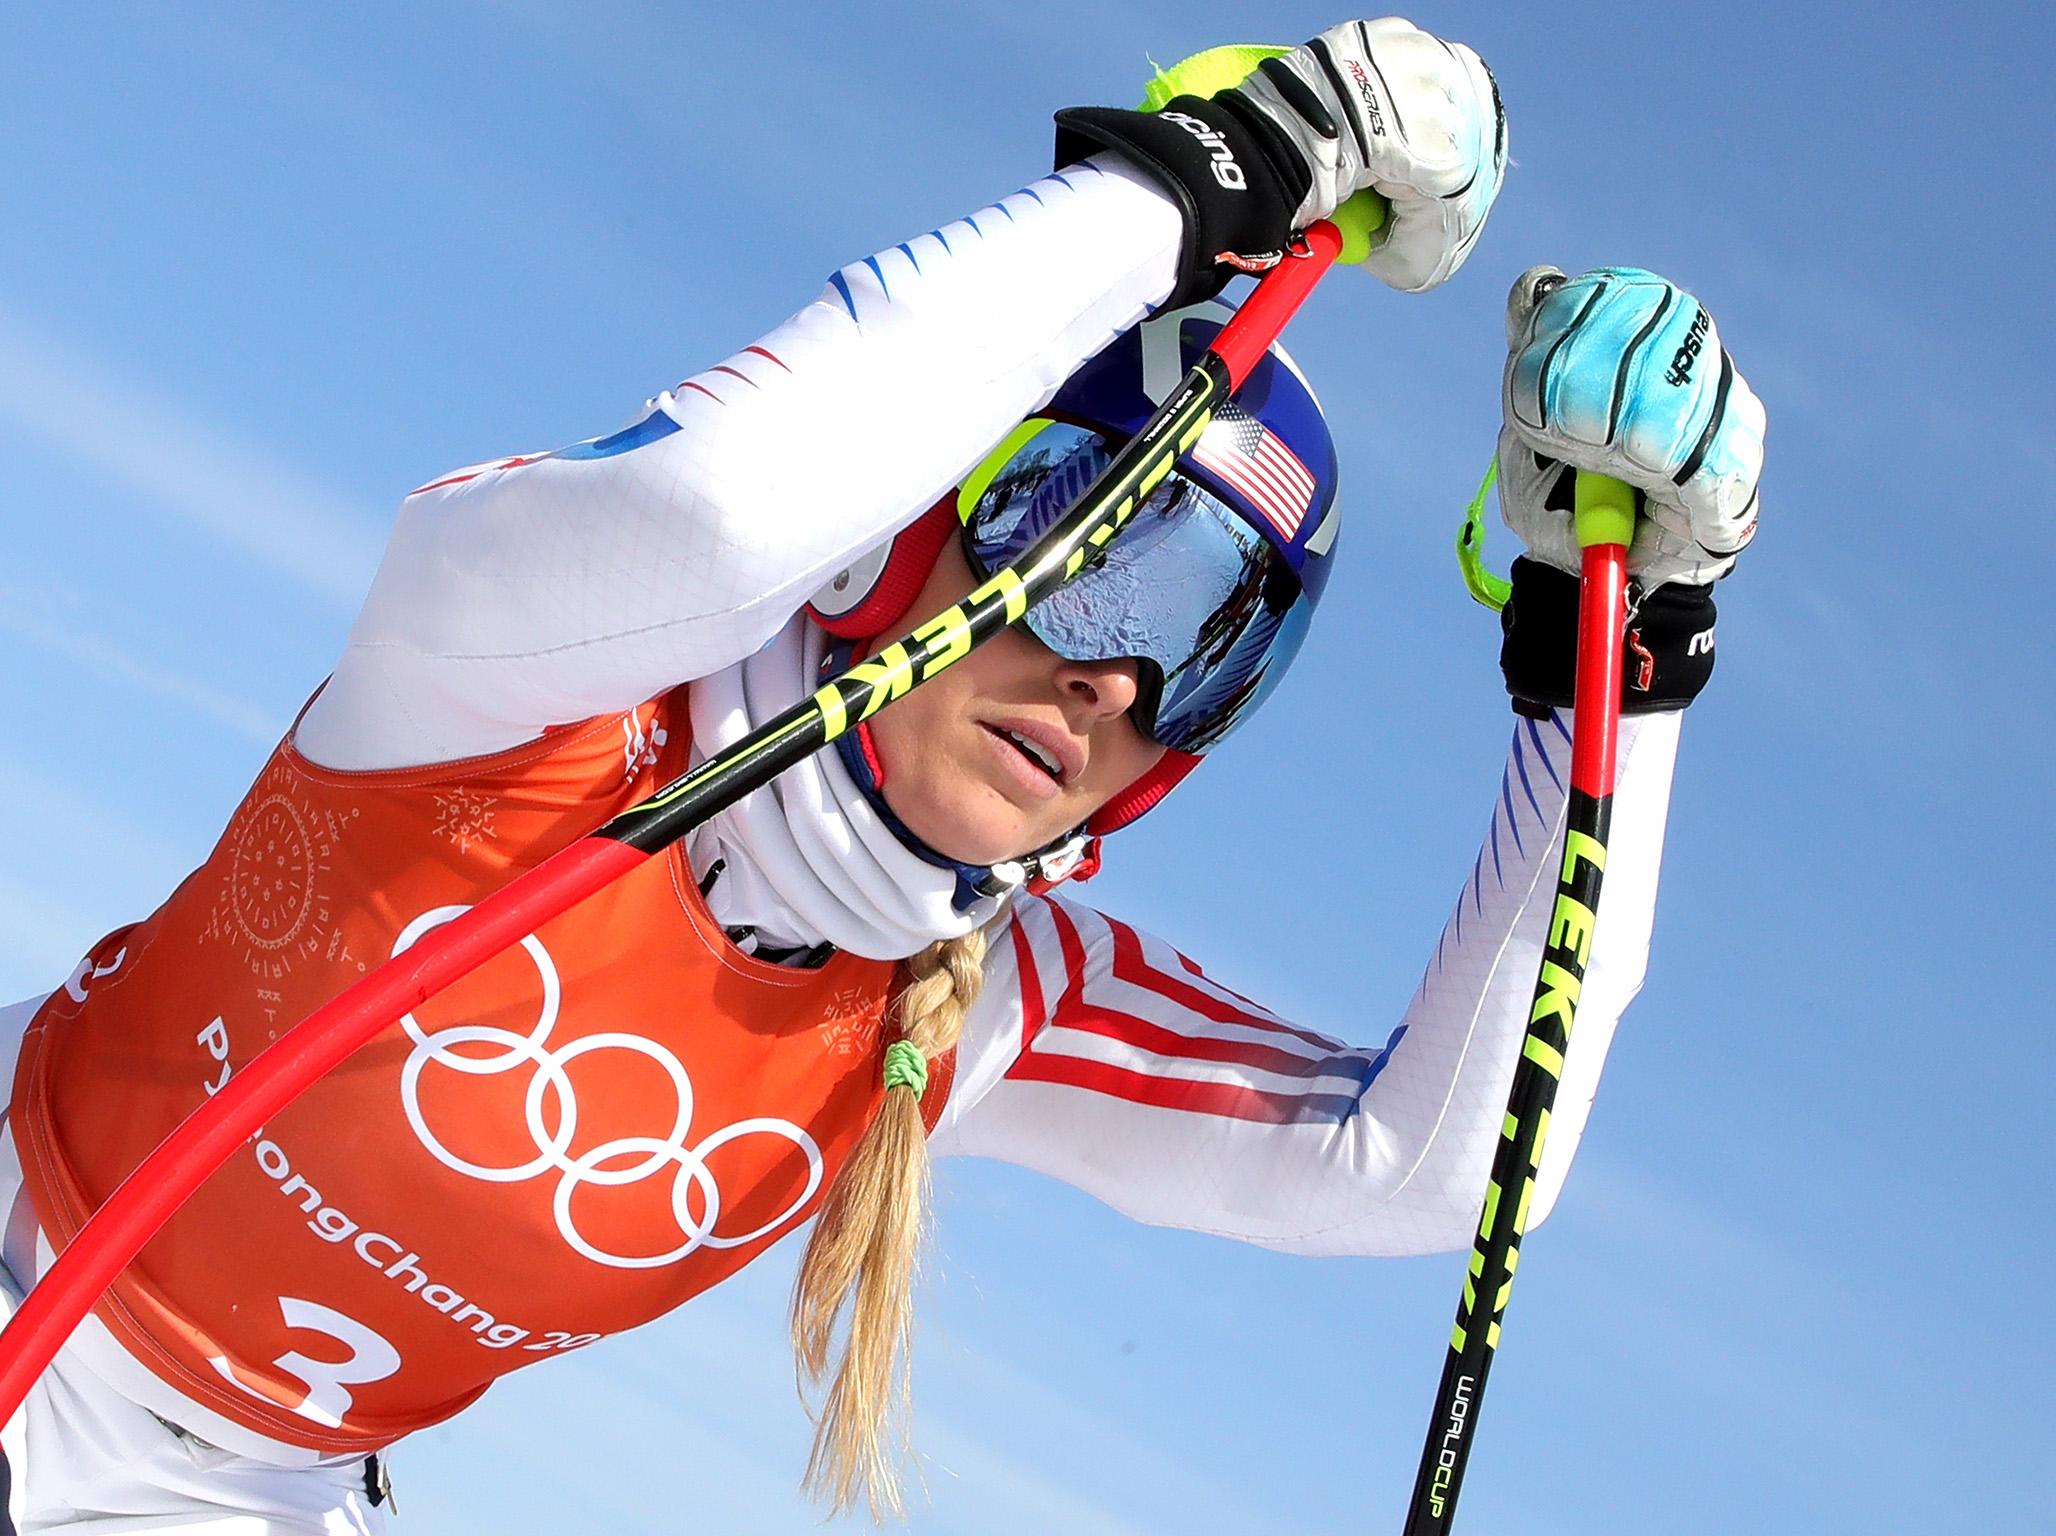 Lindsey Vonn made a mistake which cost her a medal in the super-G